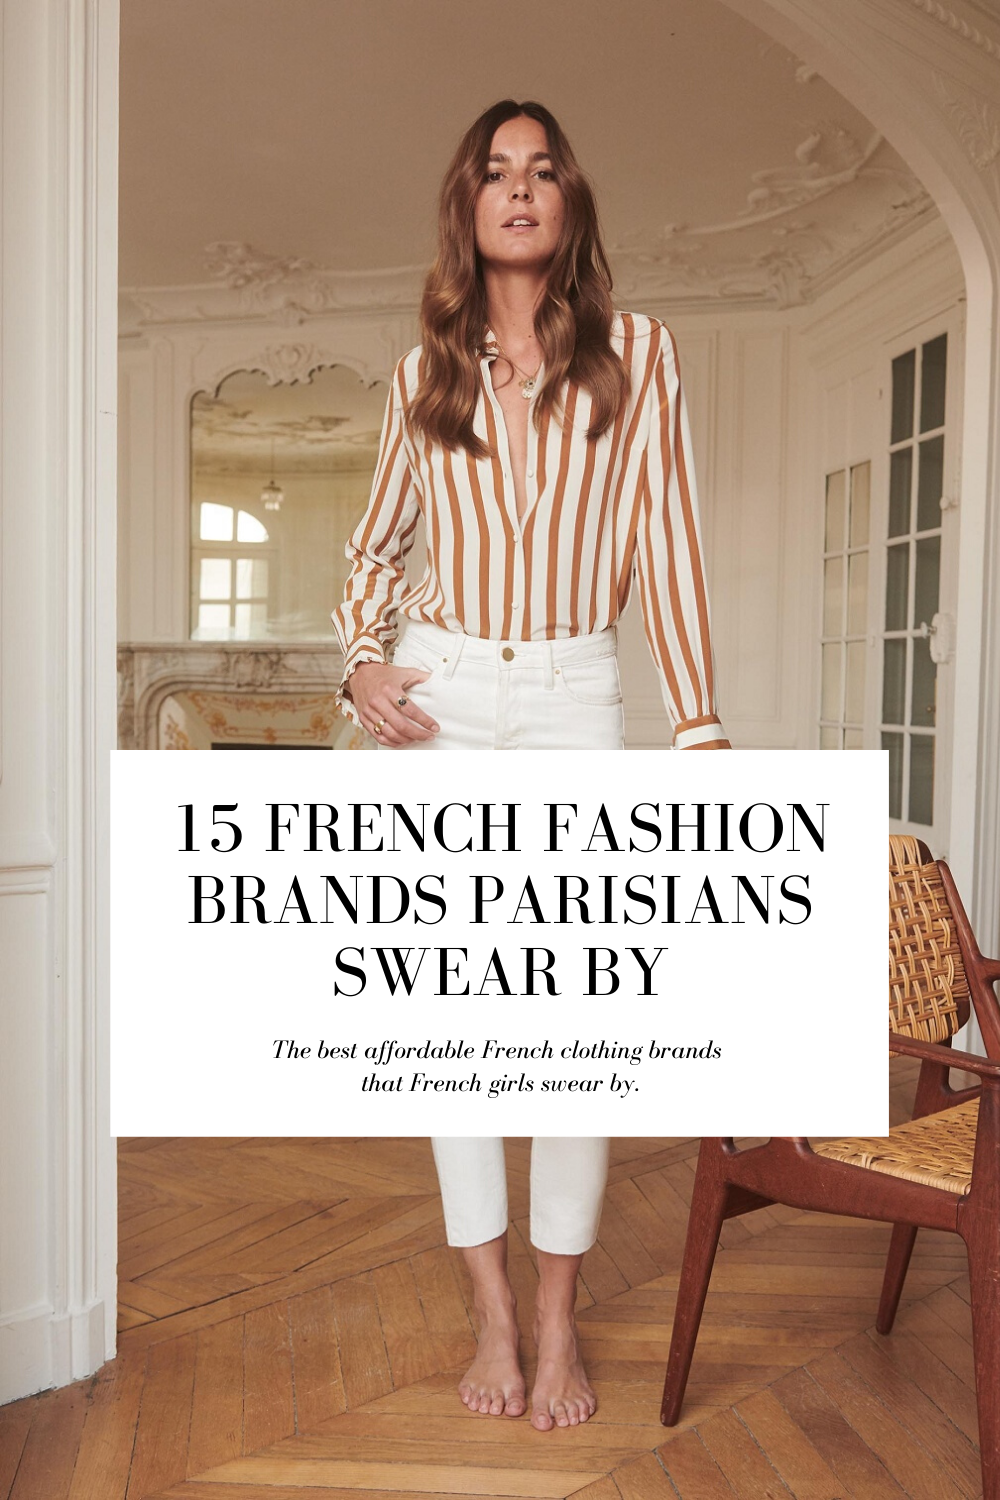 15 Affordable French Clothing Brands Parisians Swear By - 15 Affordable French Clothing Brands Parisians Swear By -   18 parisian style Autumn ideas